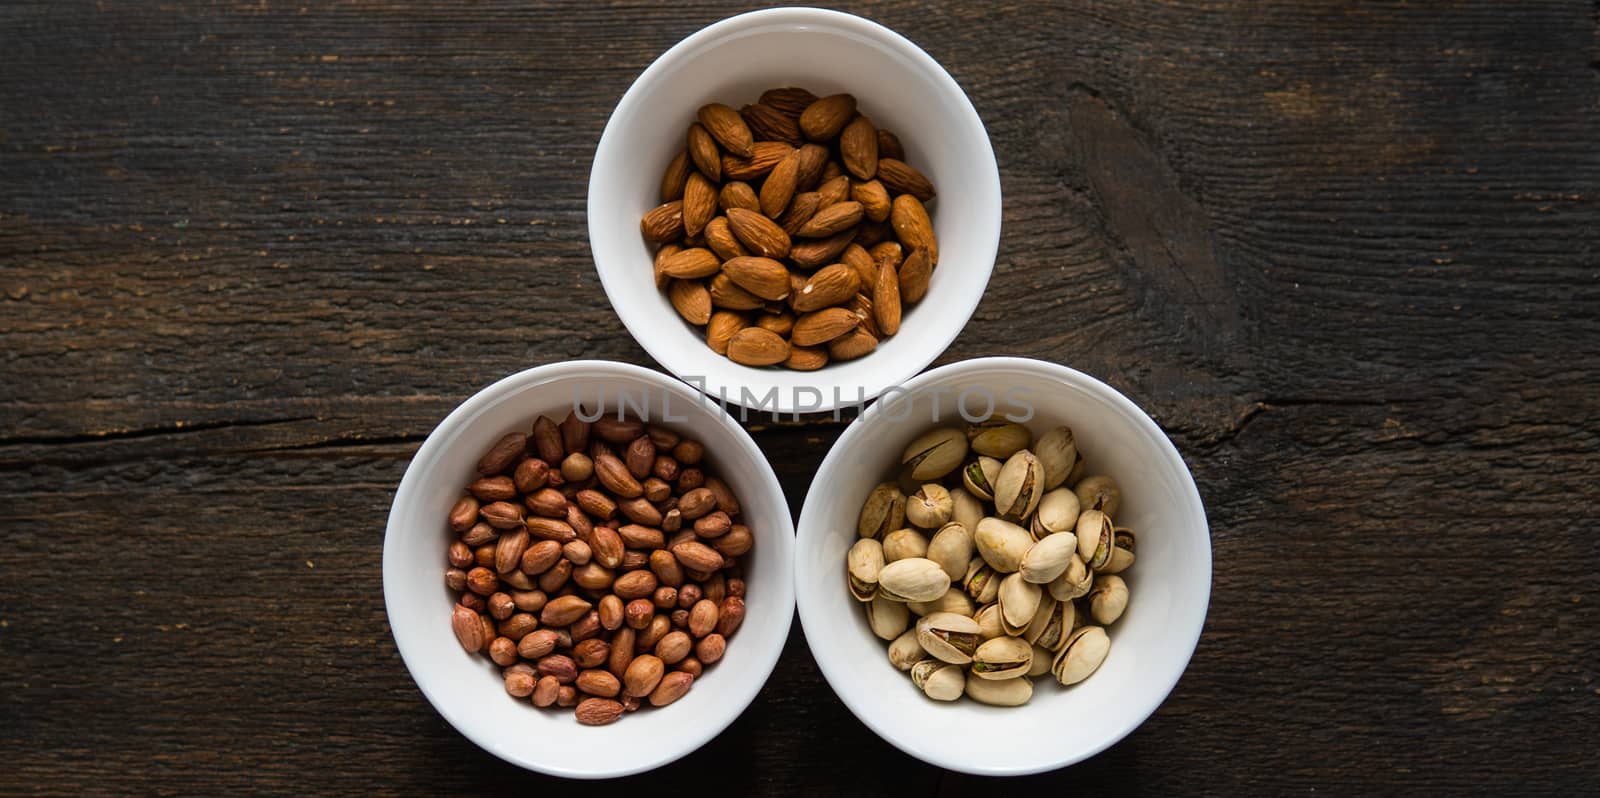 Pistachio, peanut and almond in a small plates which standing on a black table. Nuts is a healthy vegetarian protein and nutritious food